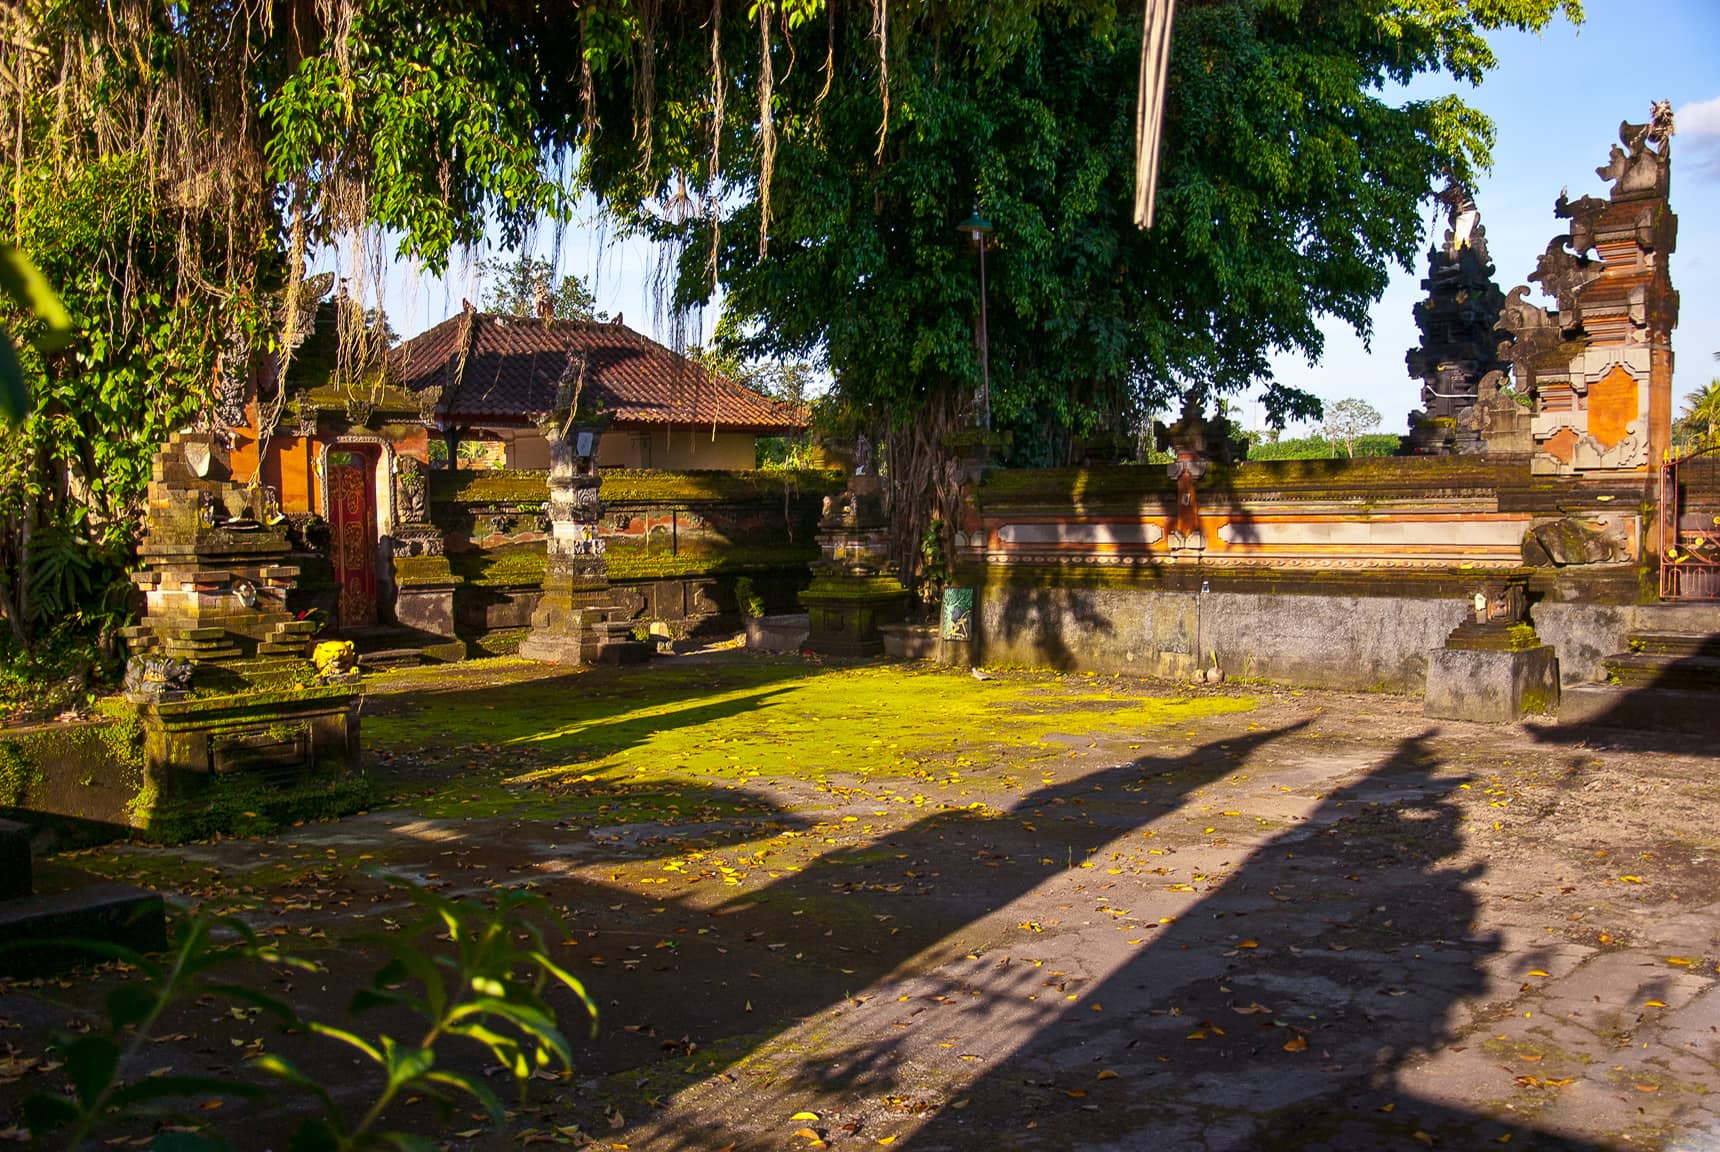 Professional photos of Hindu temples in Bali - small temple in Pererenan